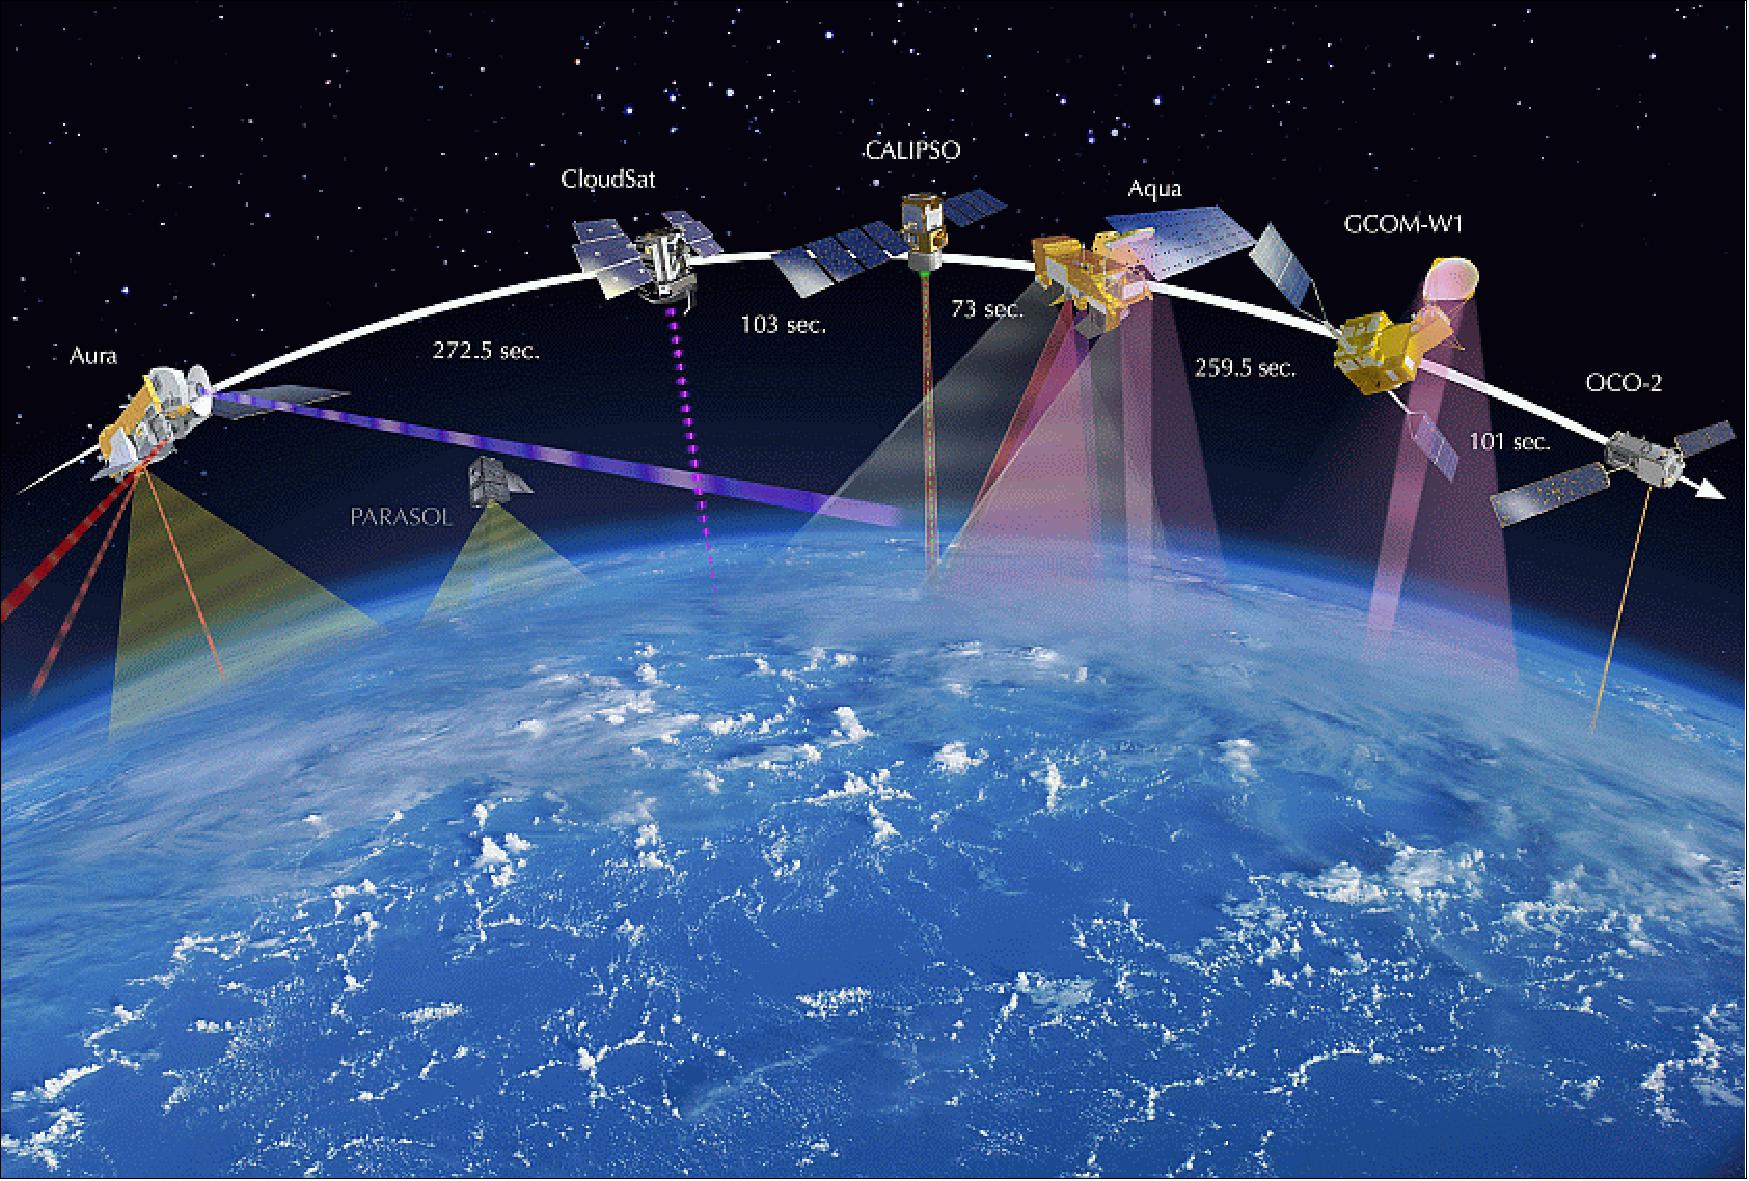 Figure 10: Artist's view of the OCO-2 spacecraft flying in the A-Train constellation with time they are separated when they fly (image credit: NASA/JPL)